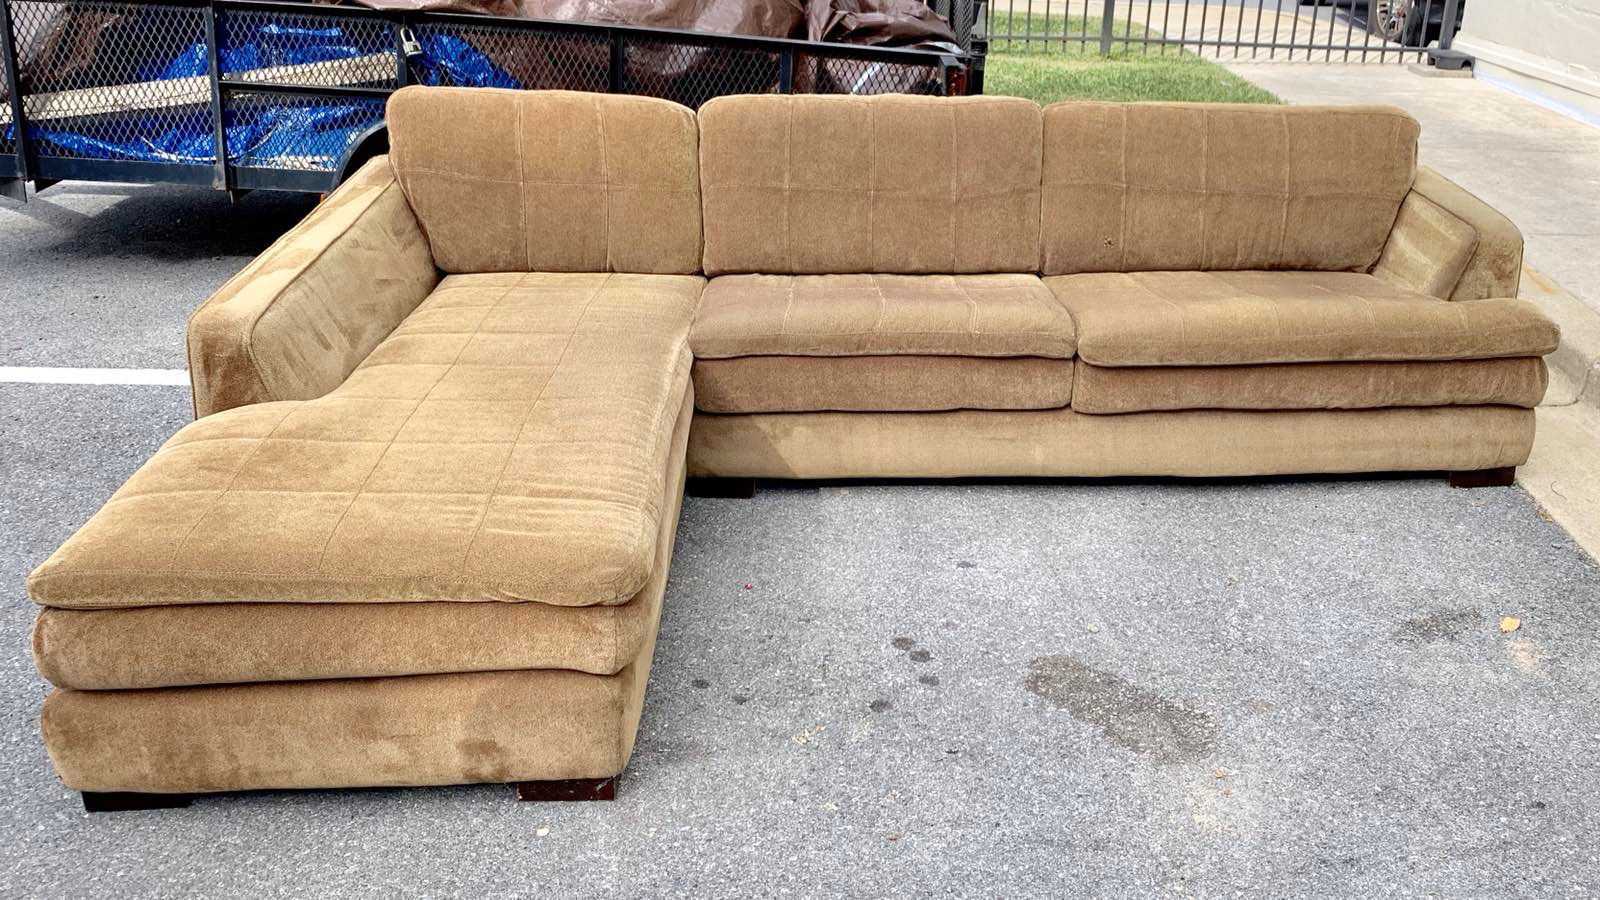 Sectional couch delivery available